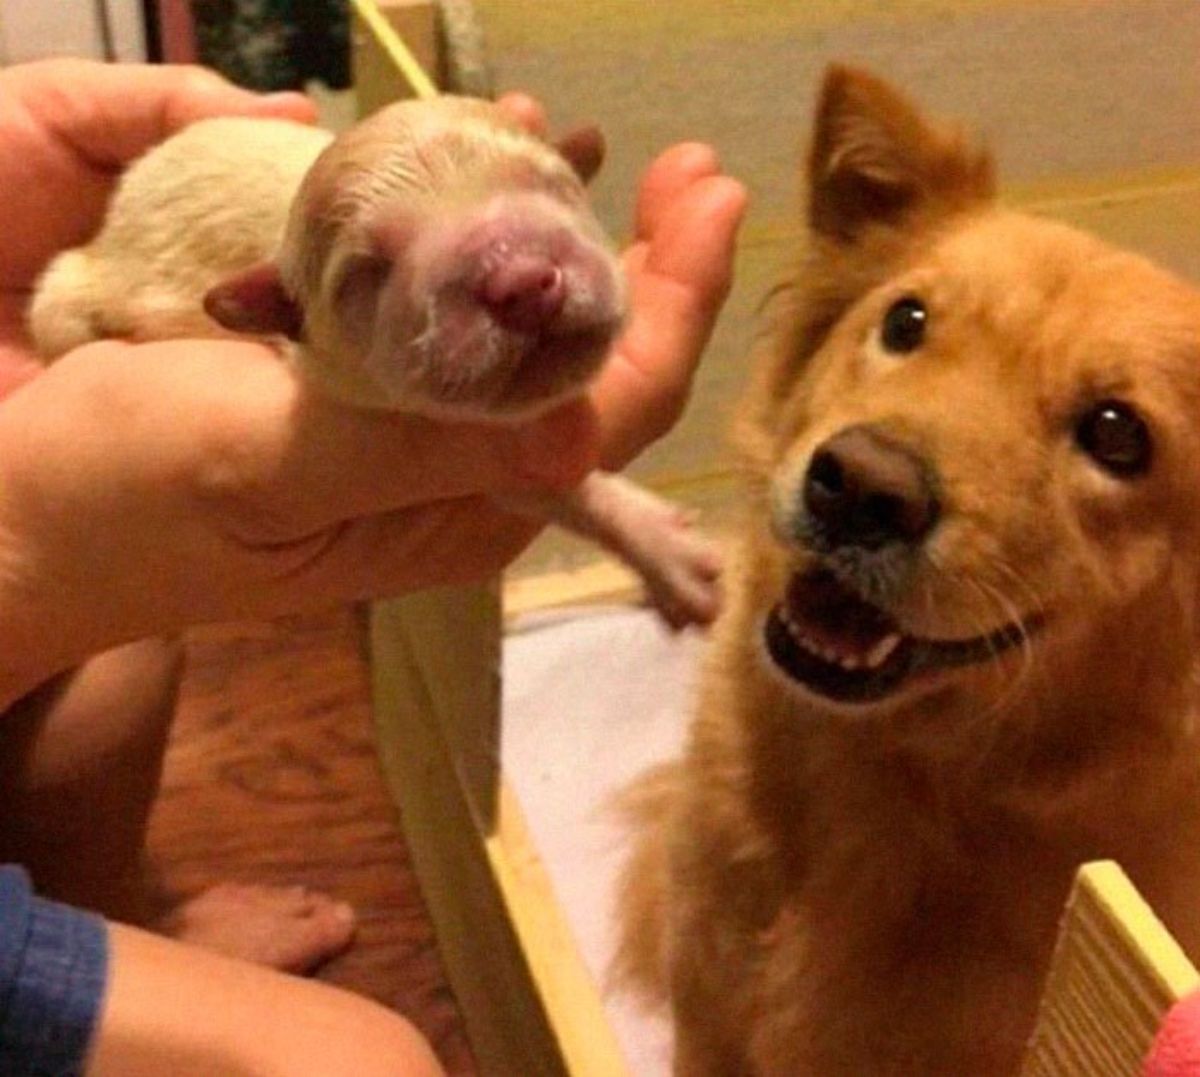 someone holding up a newborn golden retriever with an adult golden retriever sitting below and smiling proudly at the puppy